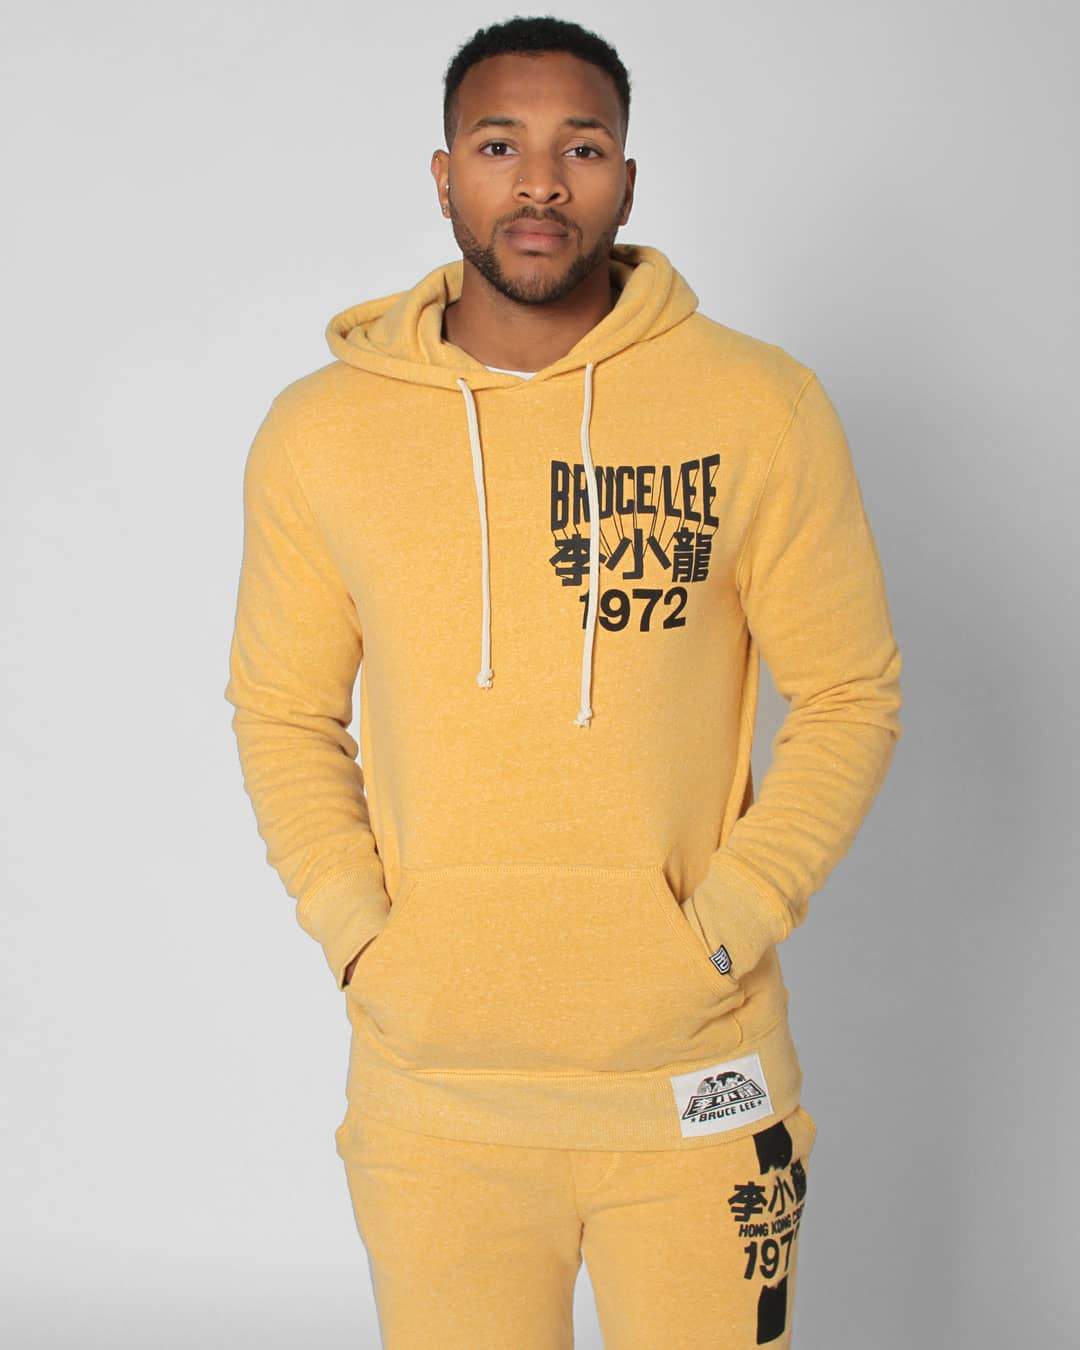 Bruce Lee 1972 Gold Pullover Hoody - Roots of Inc dba Roots of Fight